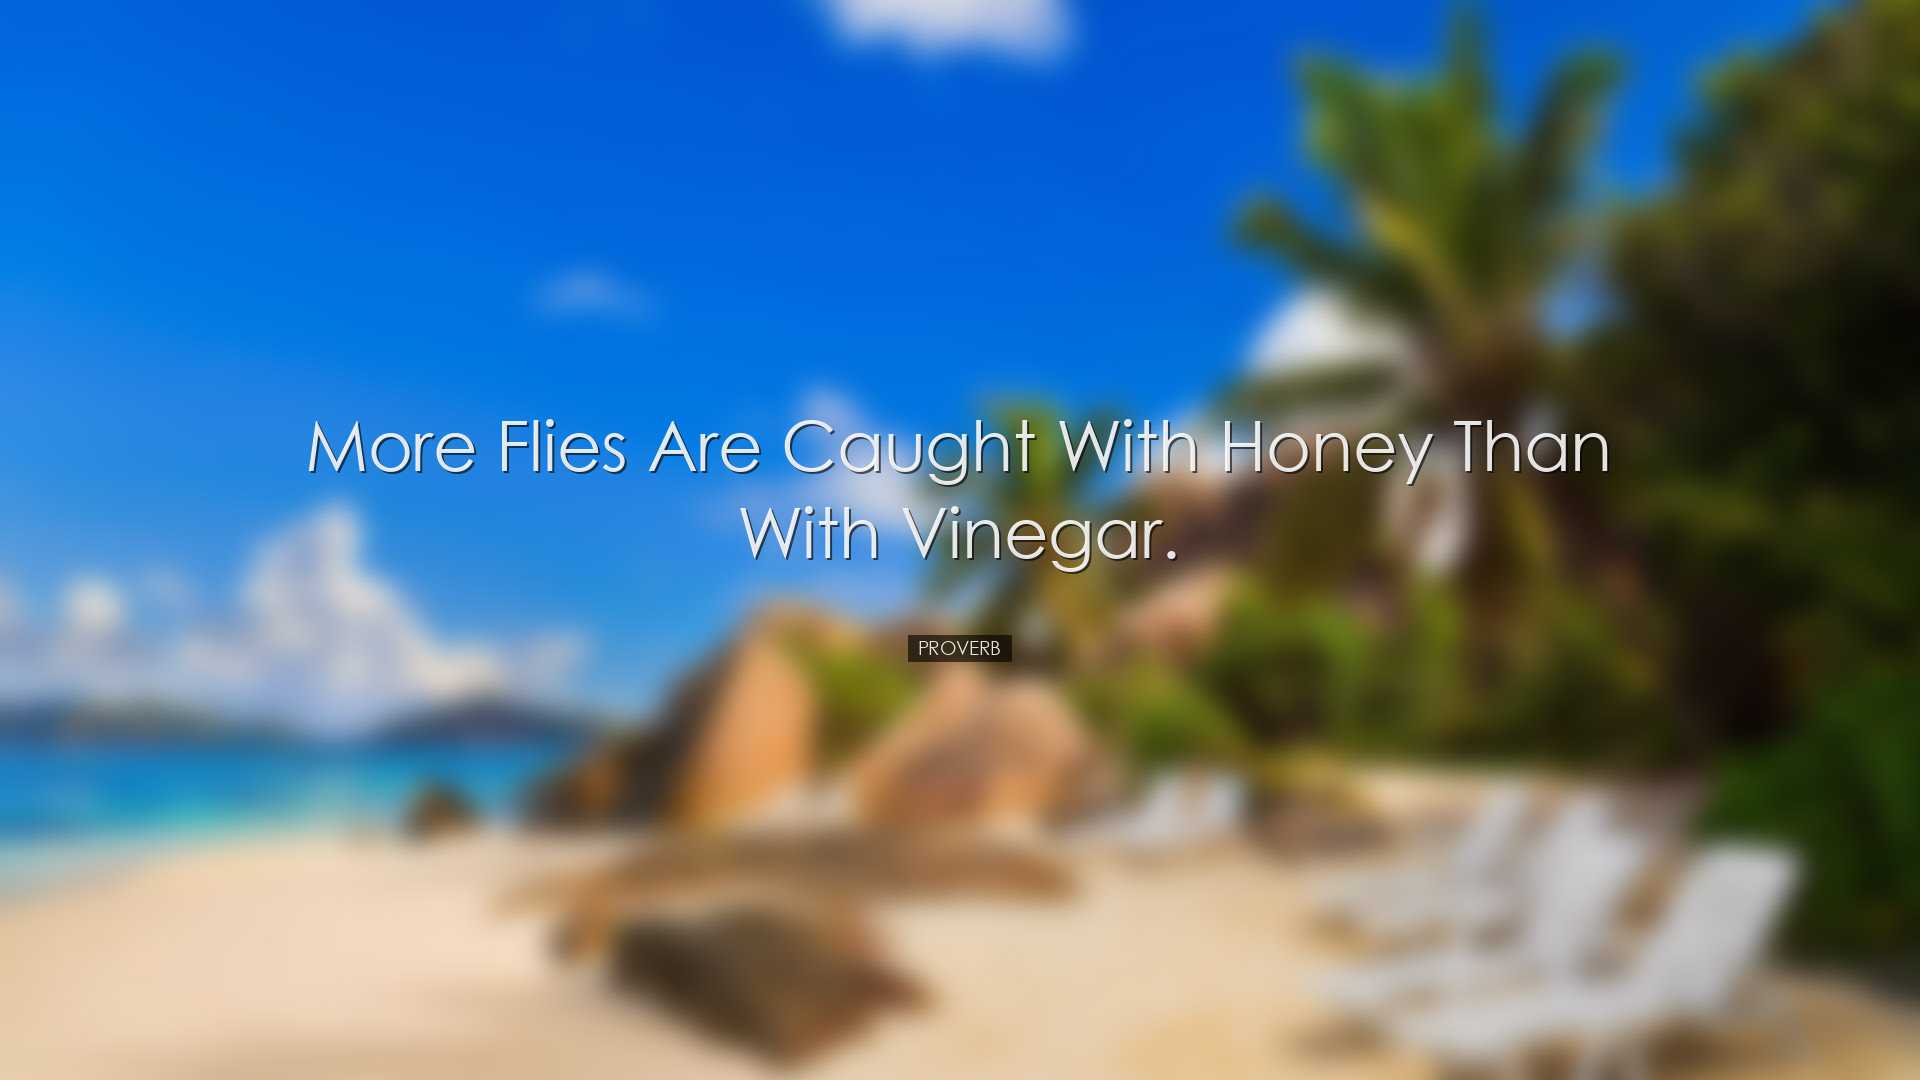 More flies are caught with honey than with vinegar. - Proverb